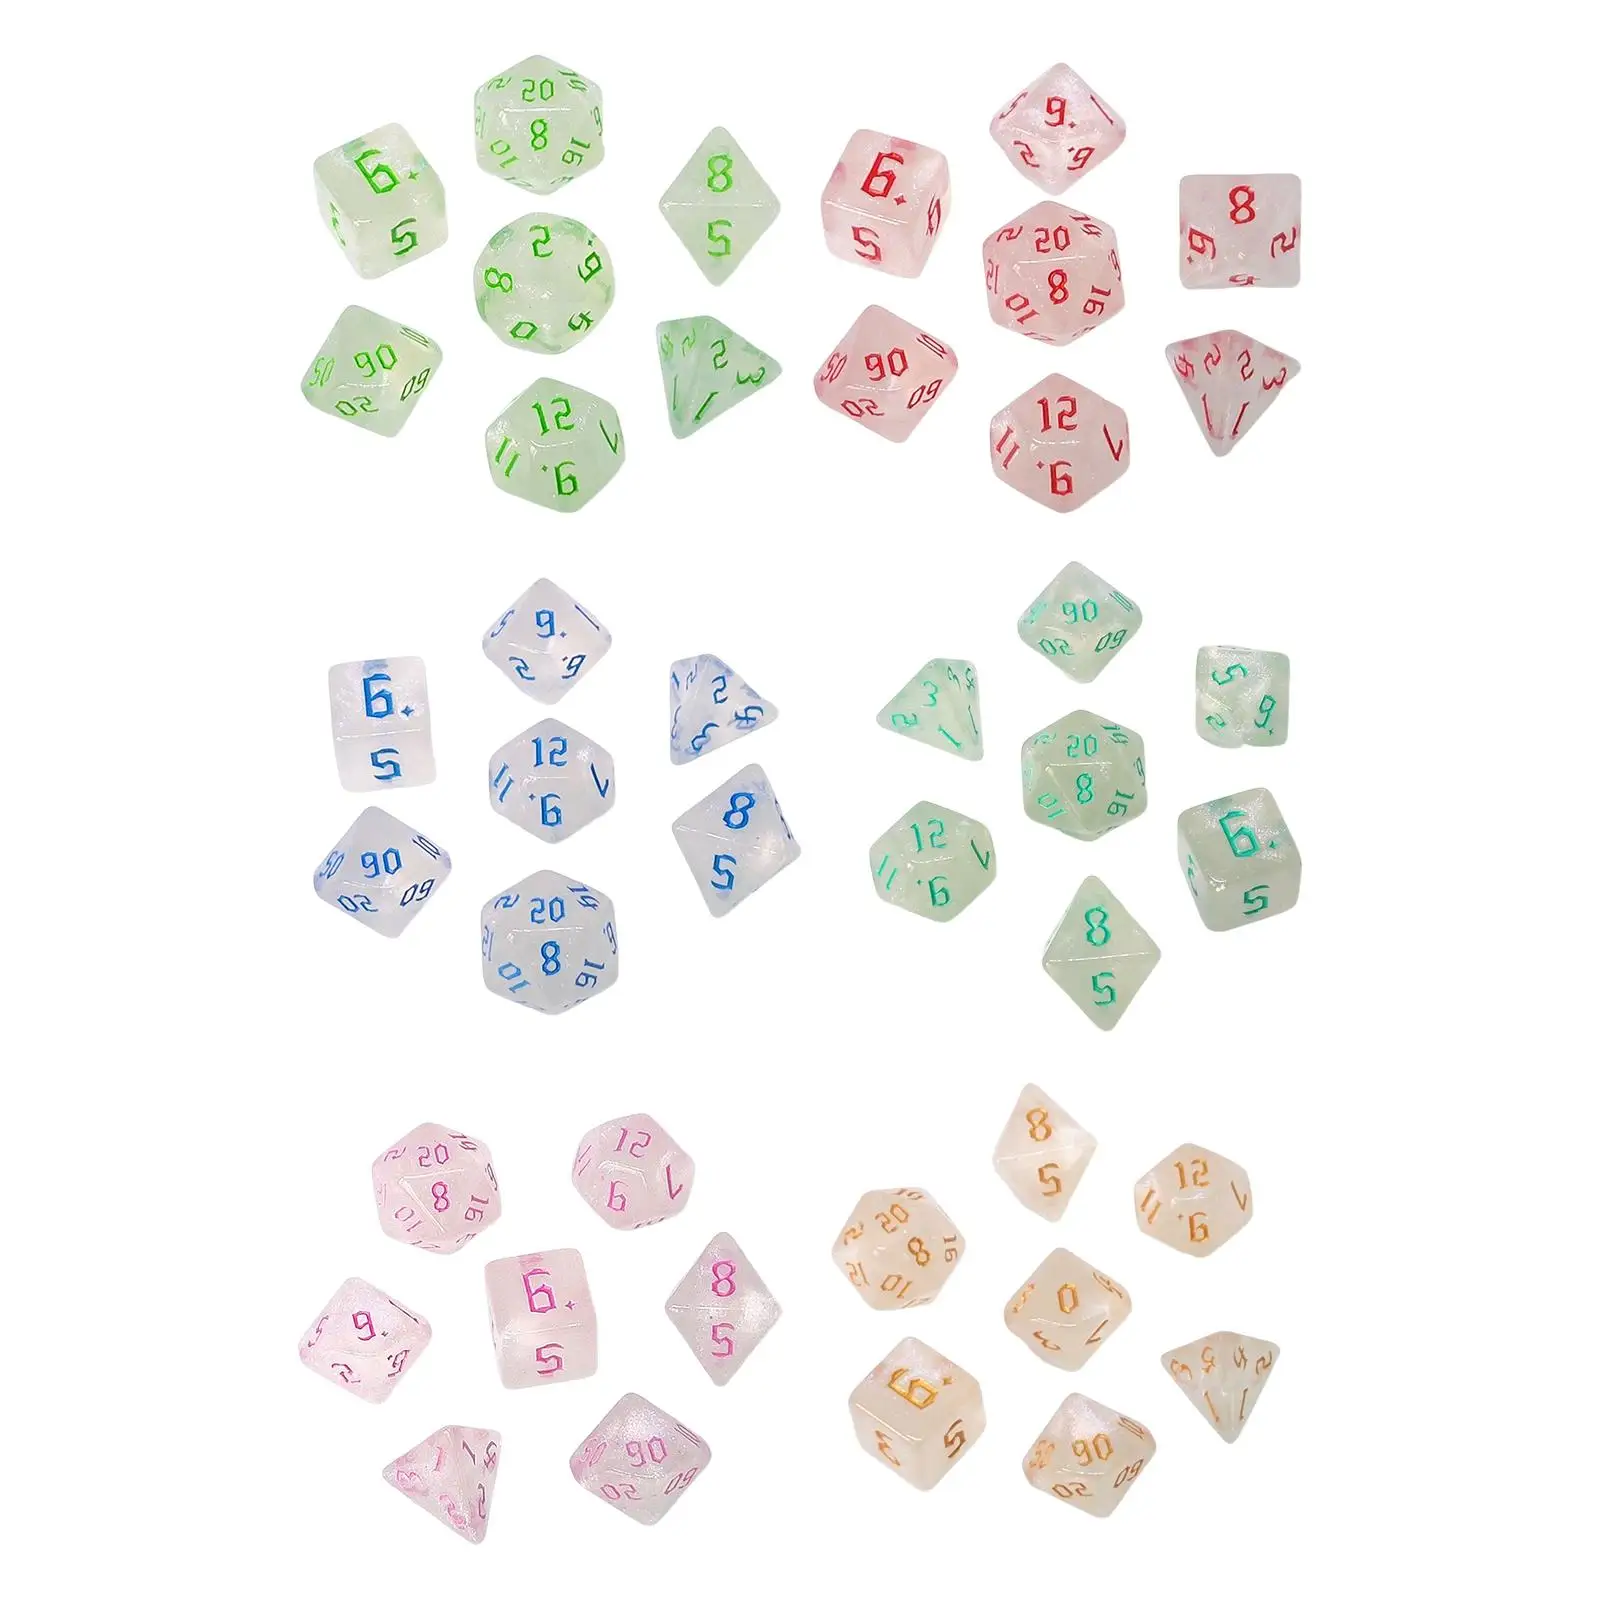 7x Acrylic Polyhedral Dices Set Multi Sided Dices D6 D4 D8 D10 D12 D20 for Math Game Favors Role Playing Kids Toys Holiday